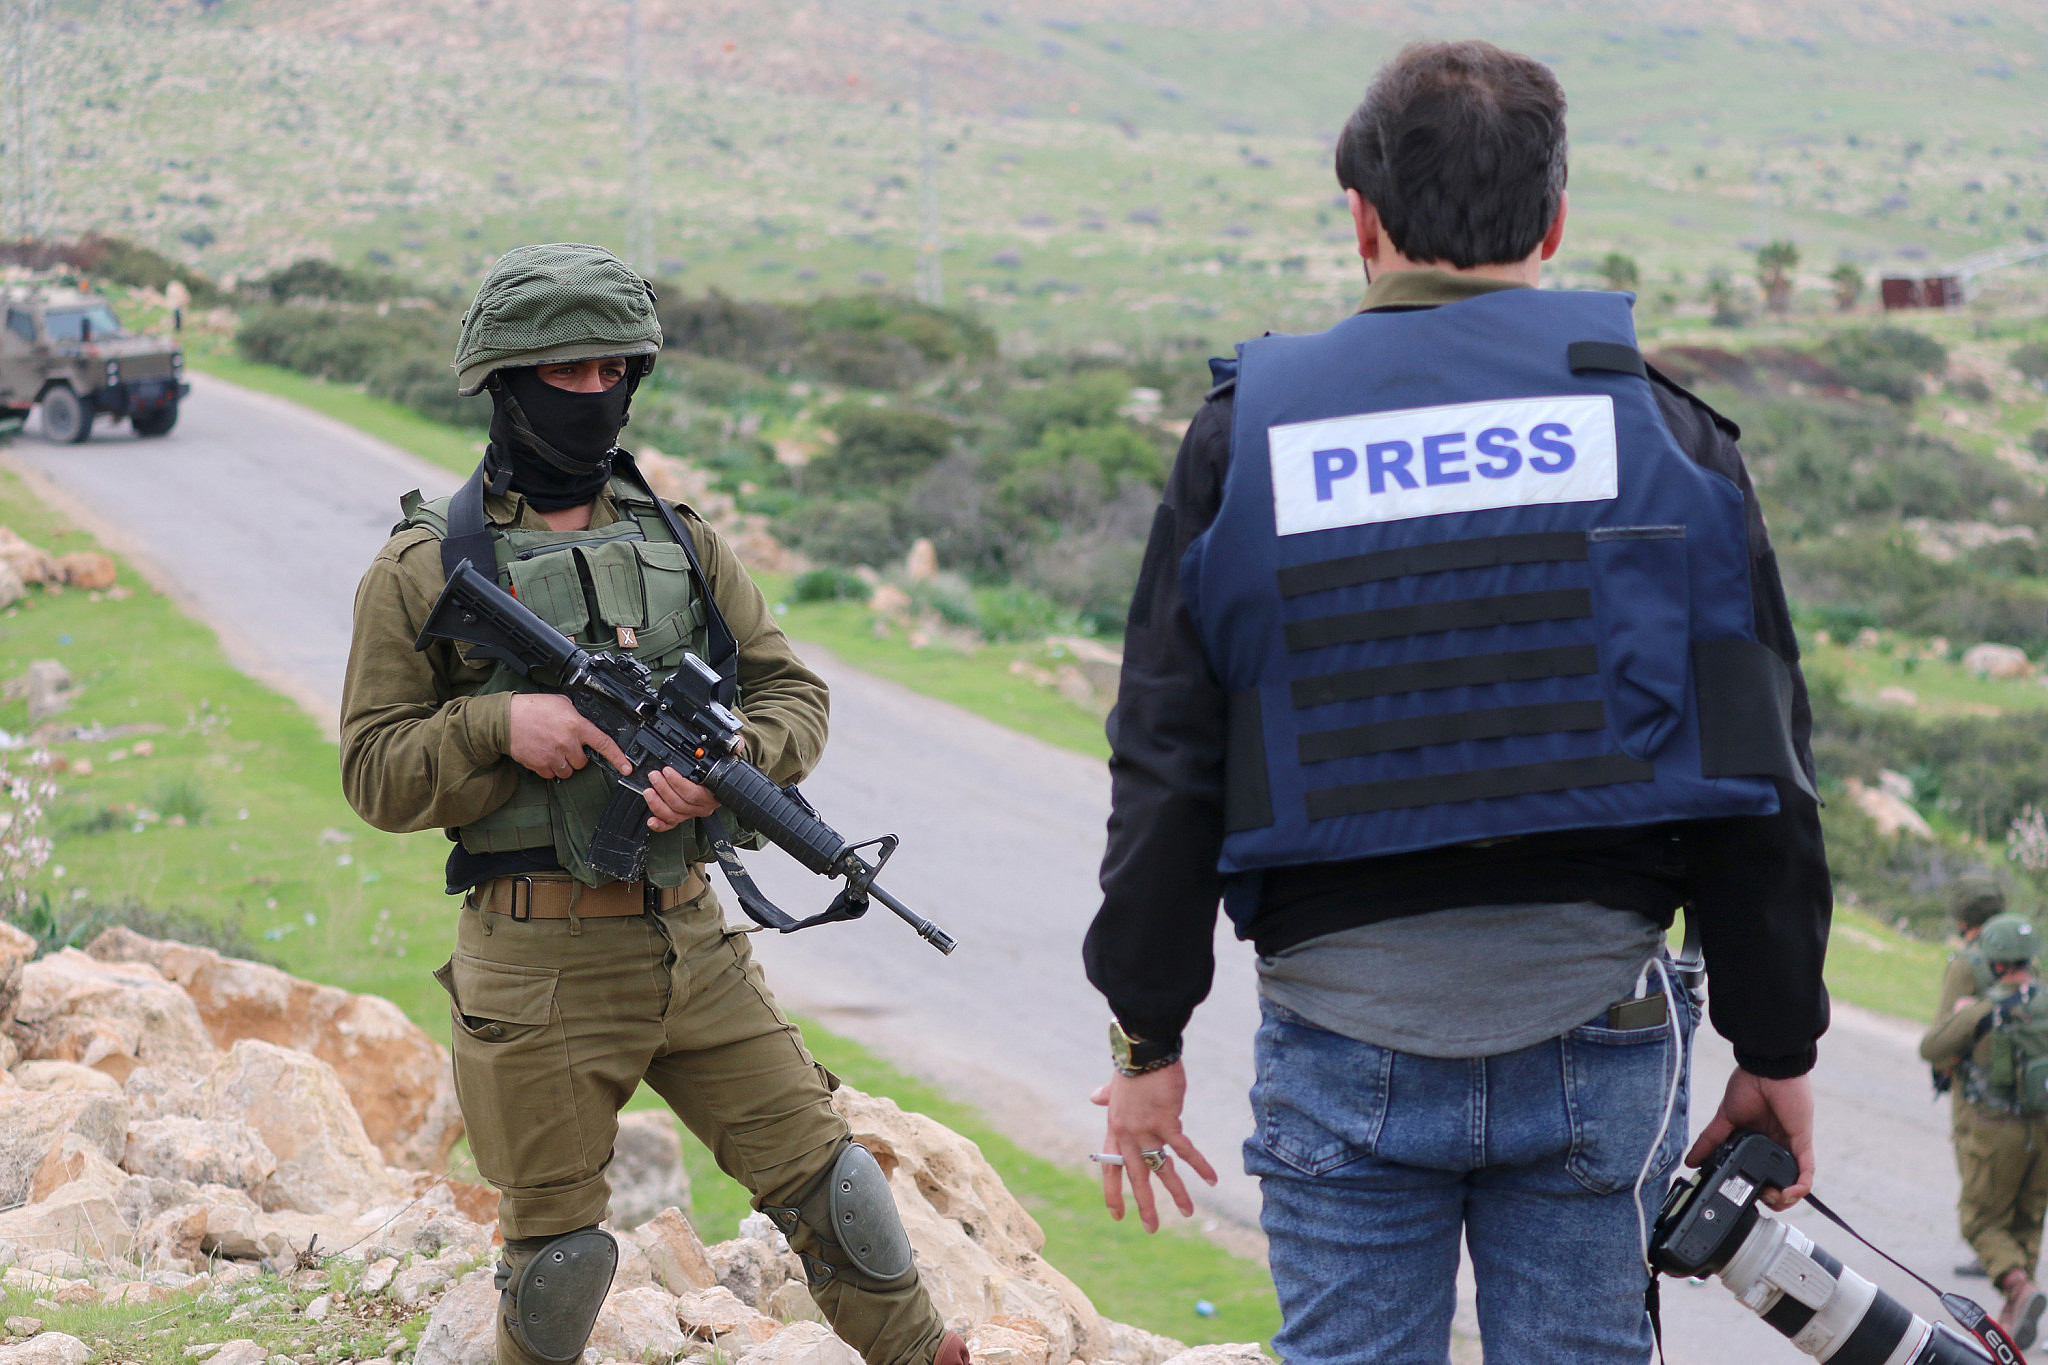 An Israeli soldier watches a Palestinian journalist during a protest against the Trump Plan, in the Jordan Valley, West Bank, February 25, 2020. (Ahmad Al-Bazz/Activestills)